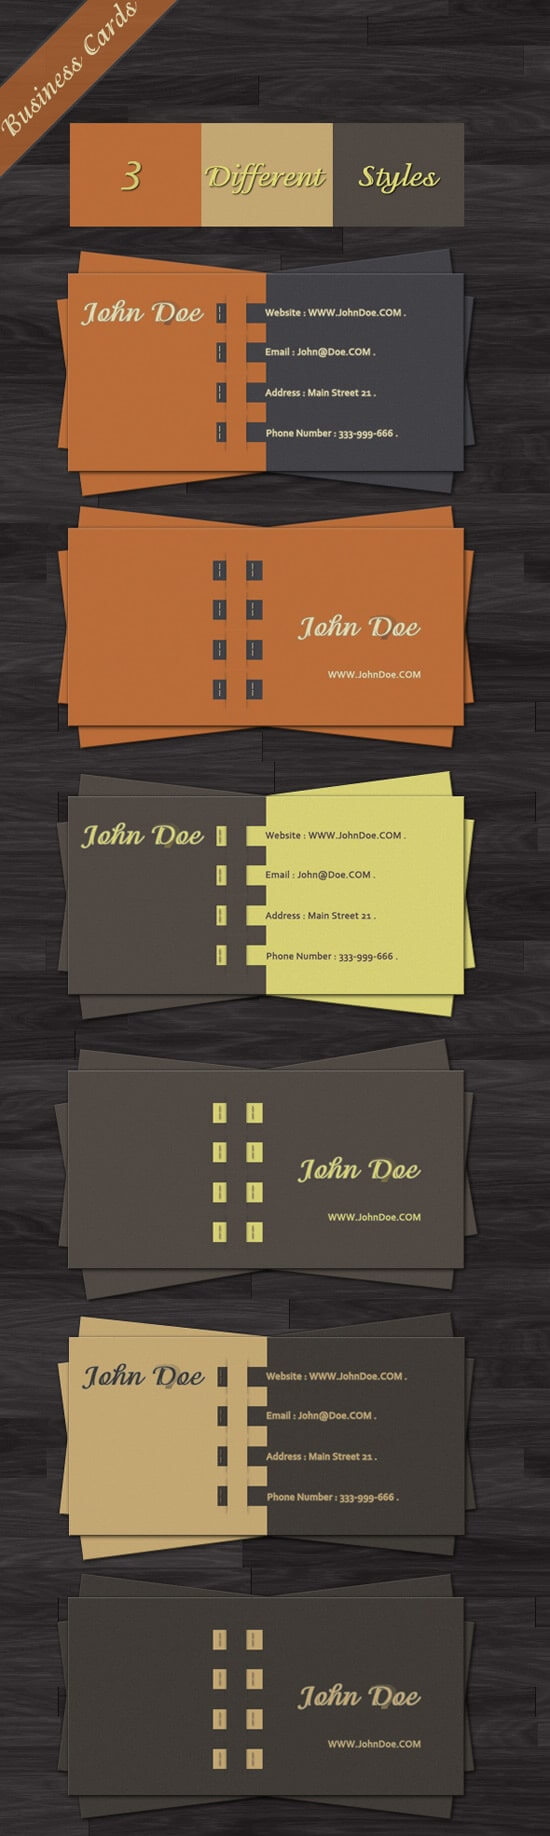 100 Free Business Card Templates – Designrfix Pertaining To Visiting Card Templates For Photoshop